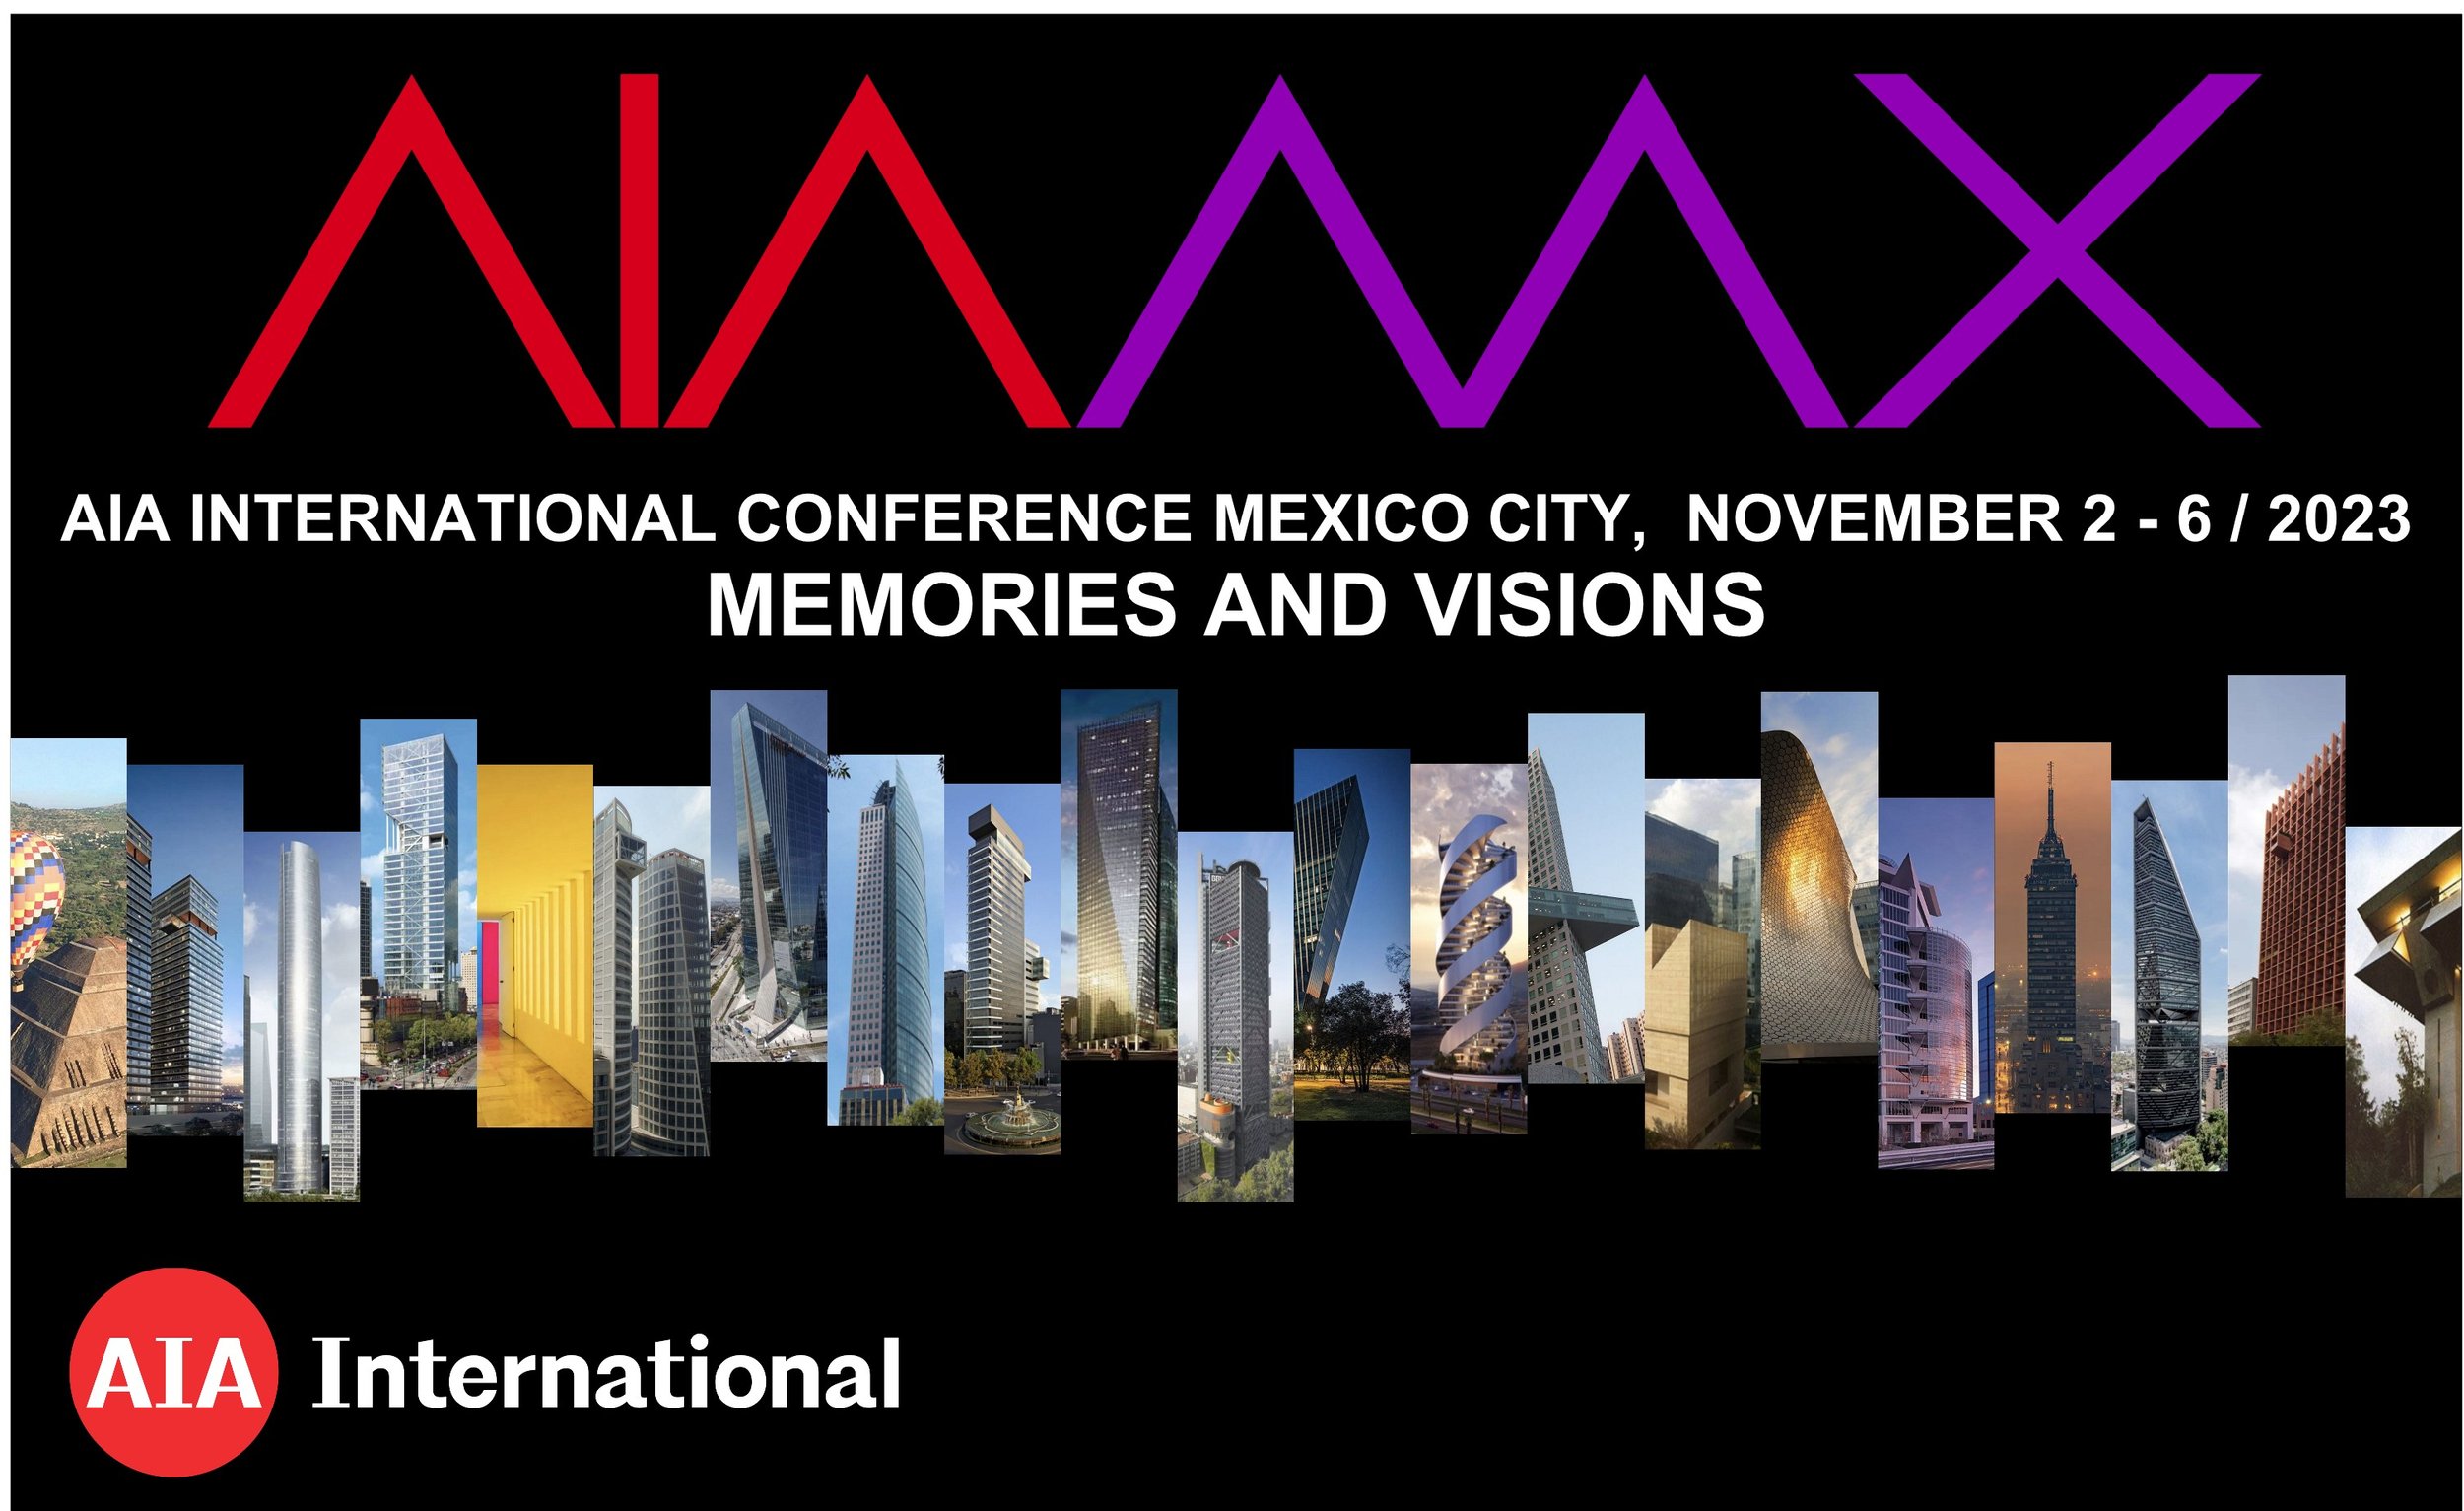 AIA International Annual Conference - Mexico City